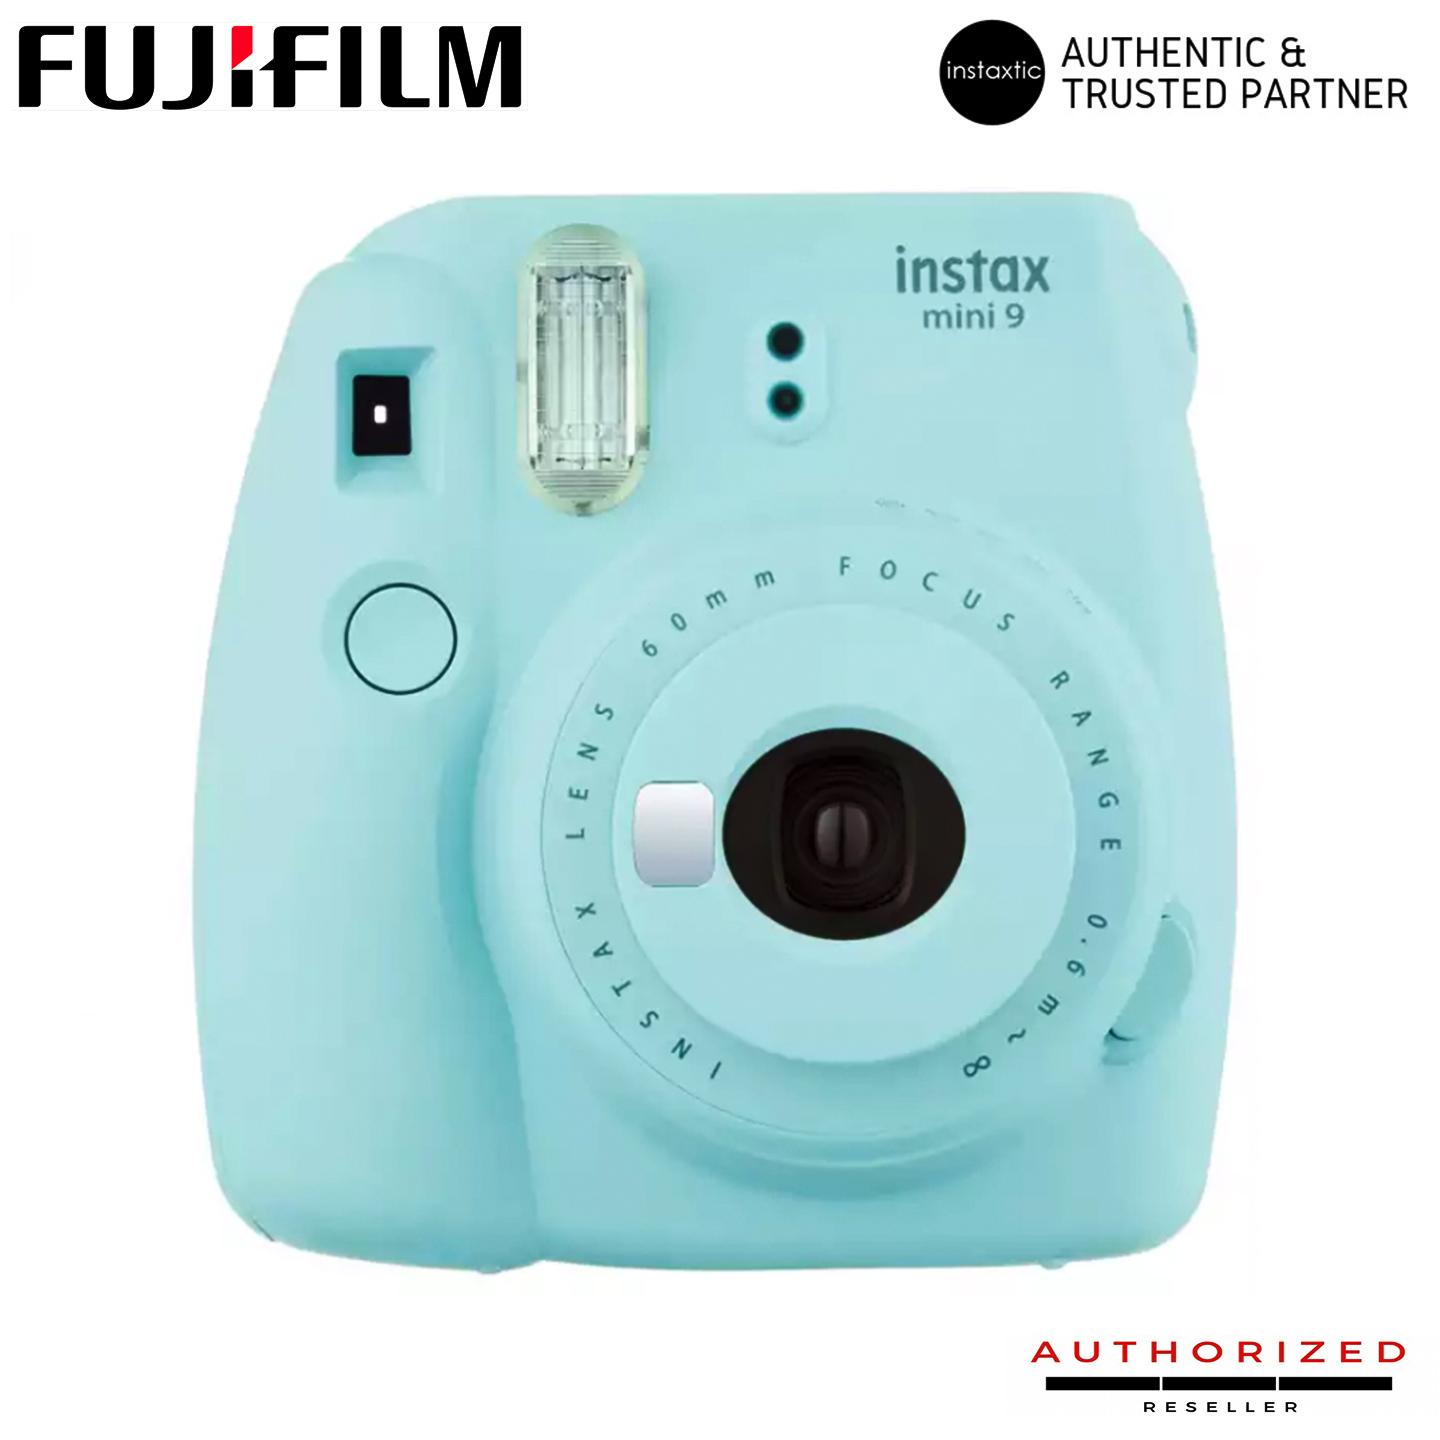 Fujifilm Instax Mini 9 Instant Film Camera Ice Blue Fujifilm Philippines One Year Warranty On Factory Defect Review And Price